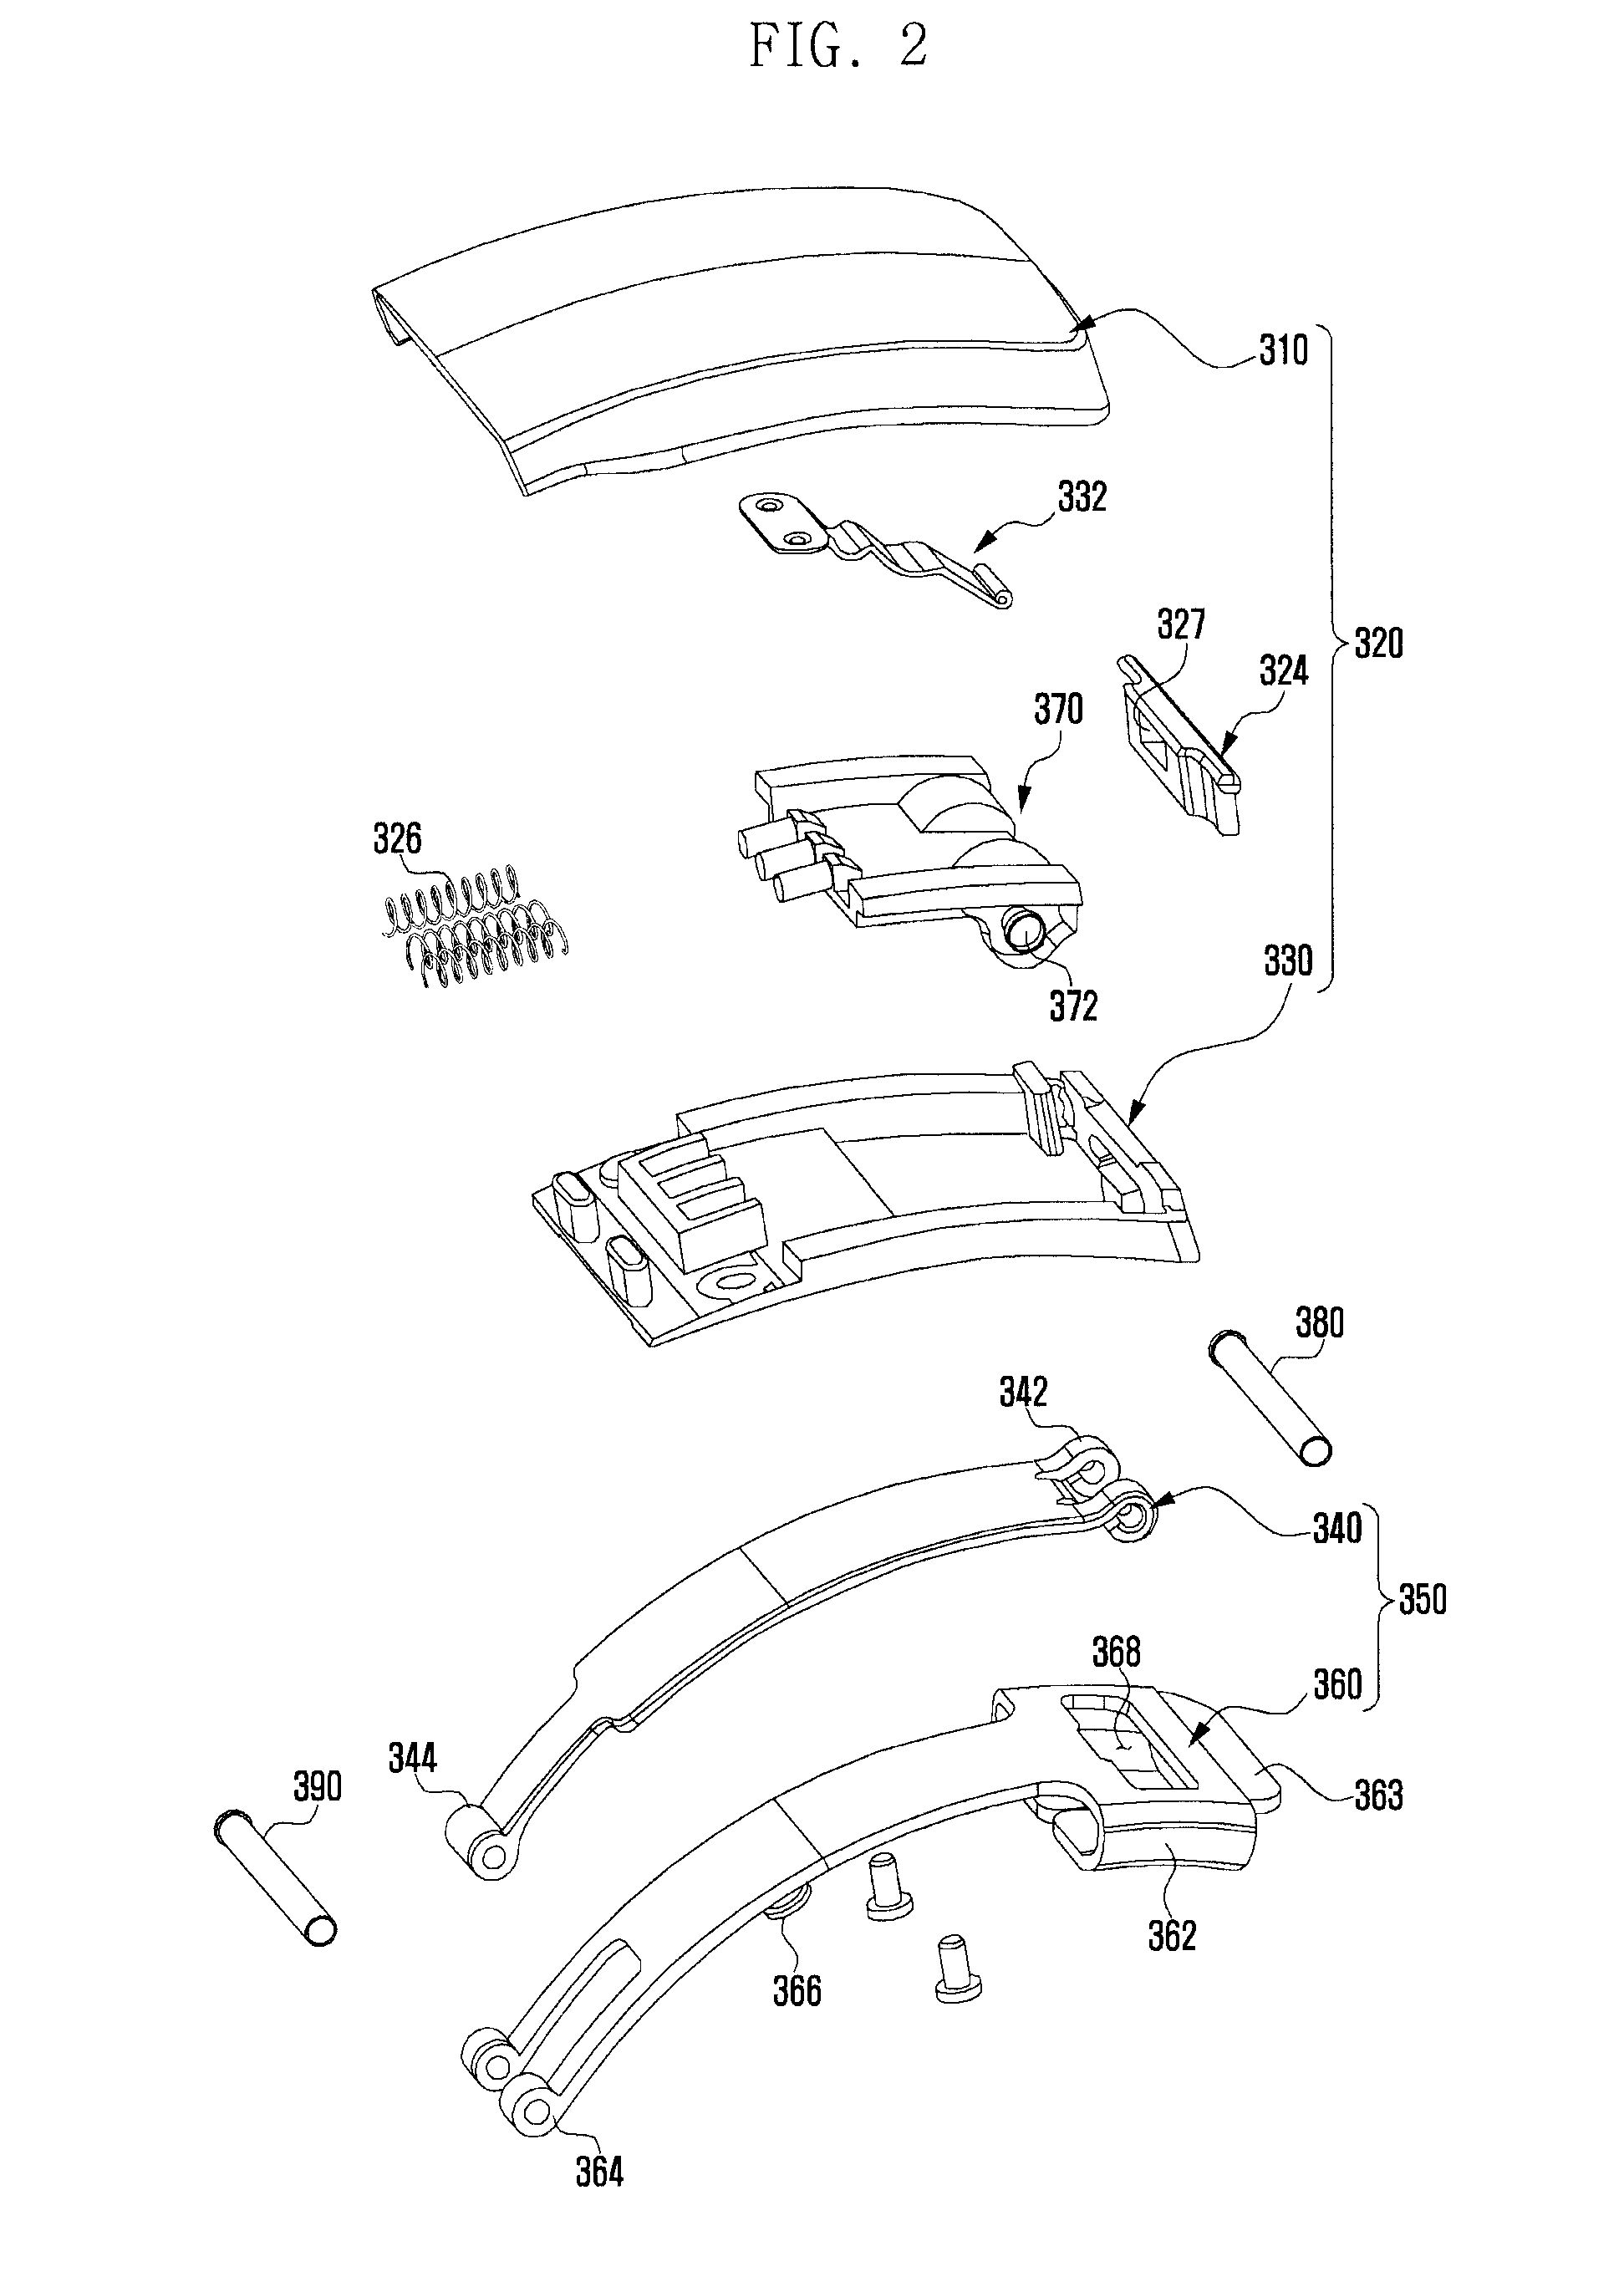 Buckle apparatus for wearable device